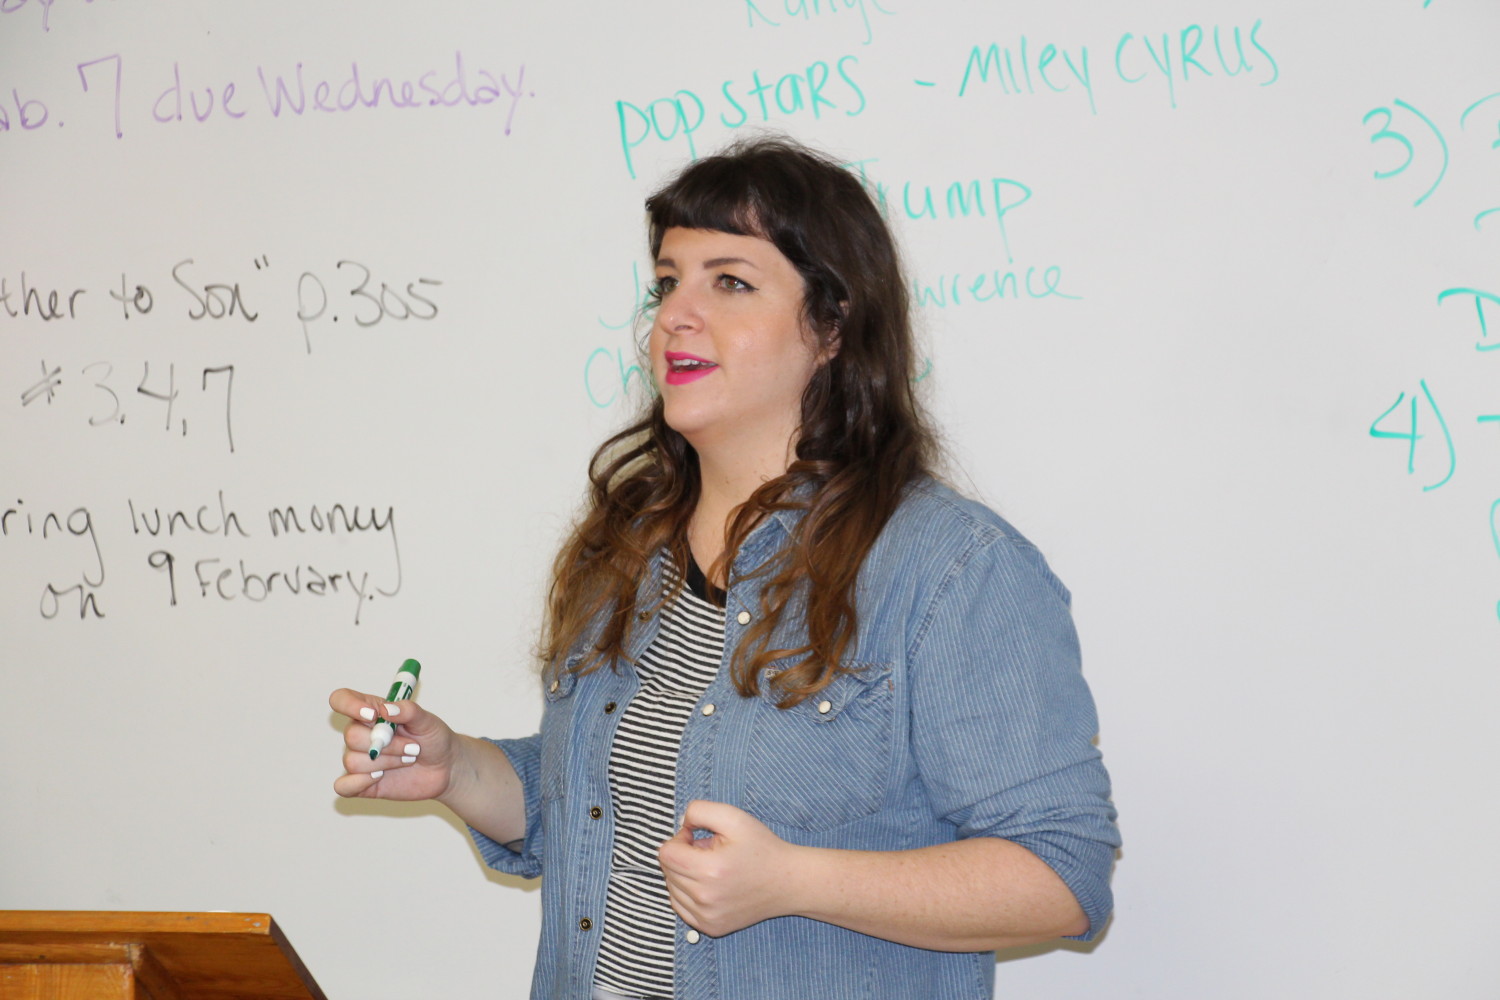  Nationally recognized poet, Megan Falley, has writing workshop for English students